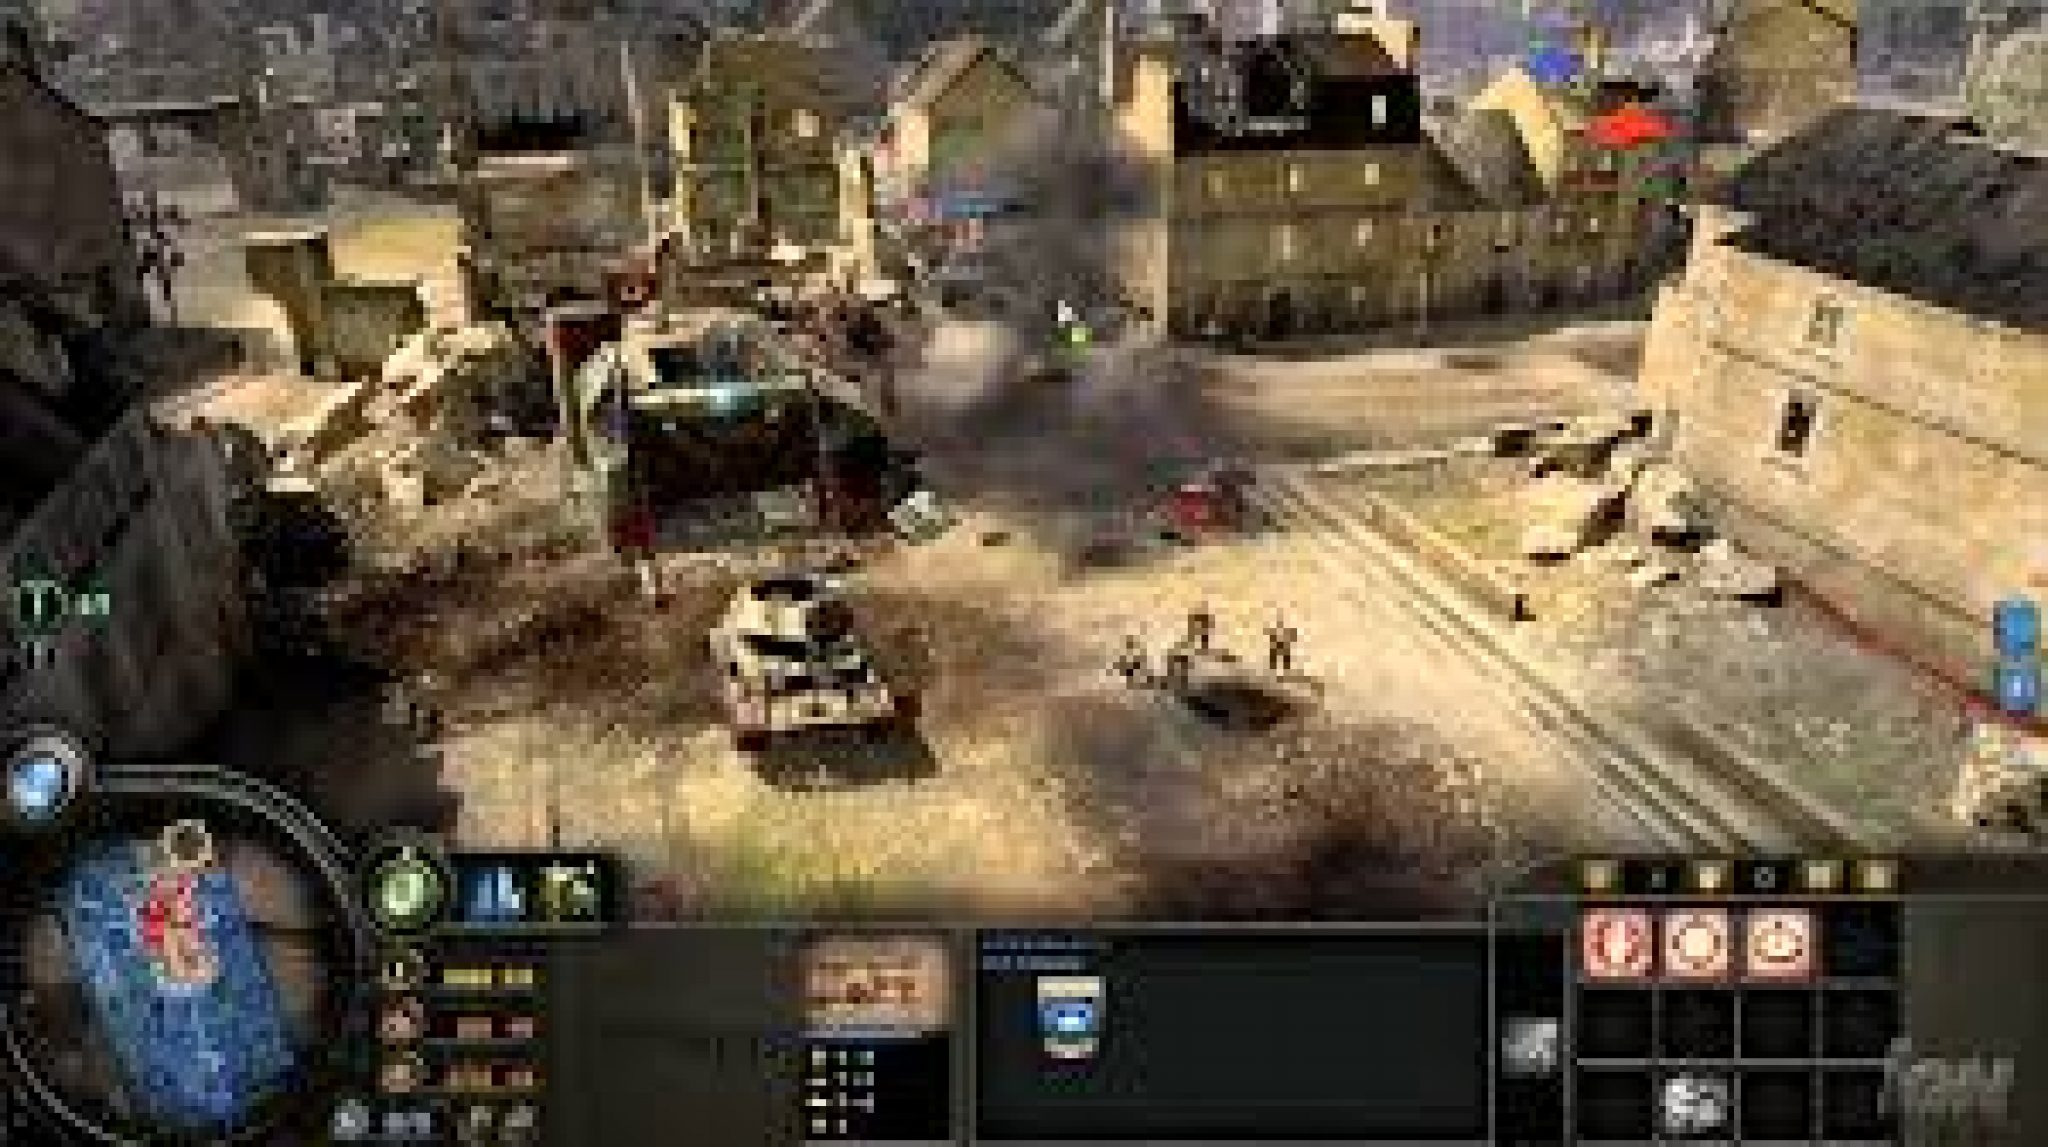 company of heroes 1 free download full game